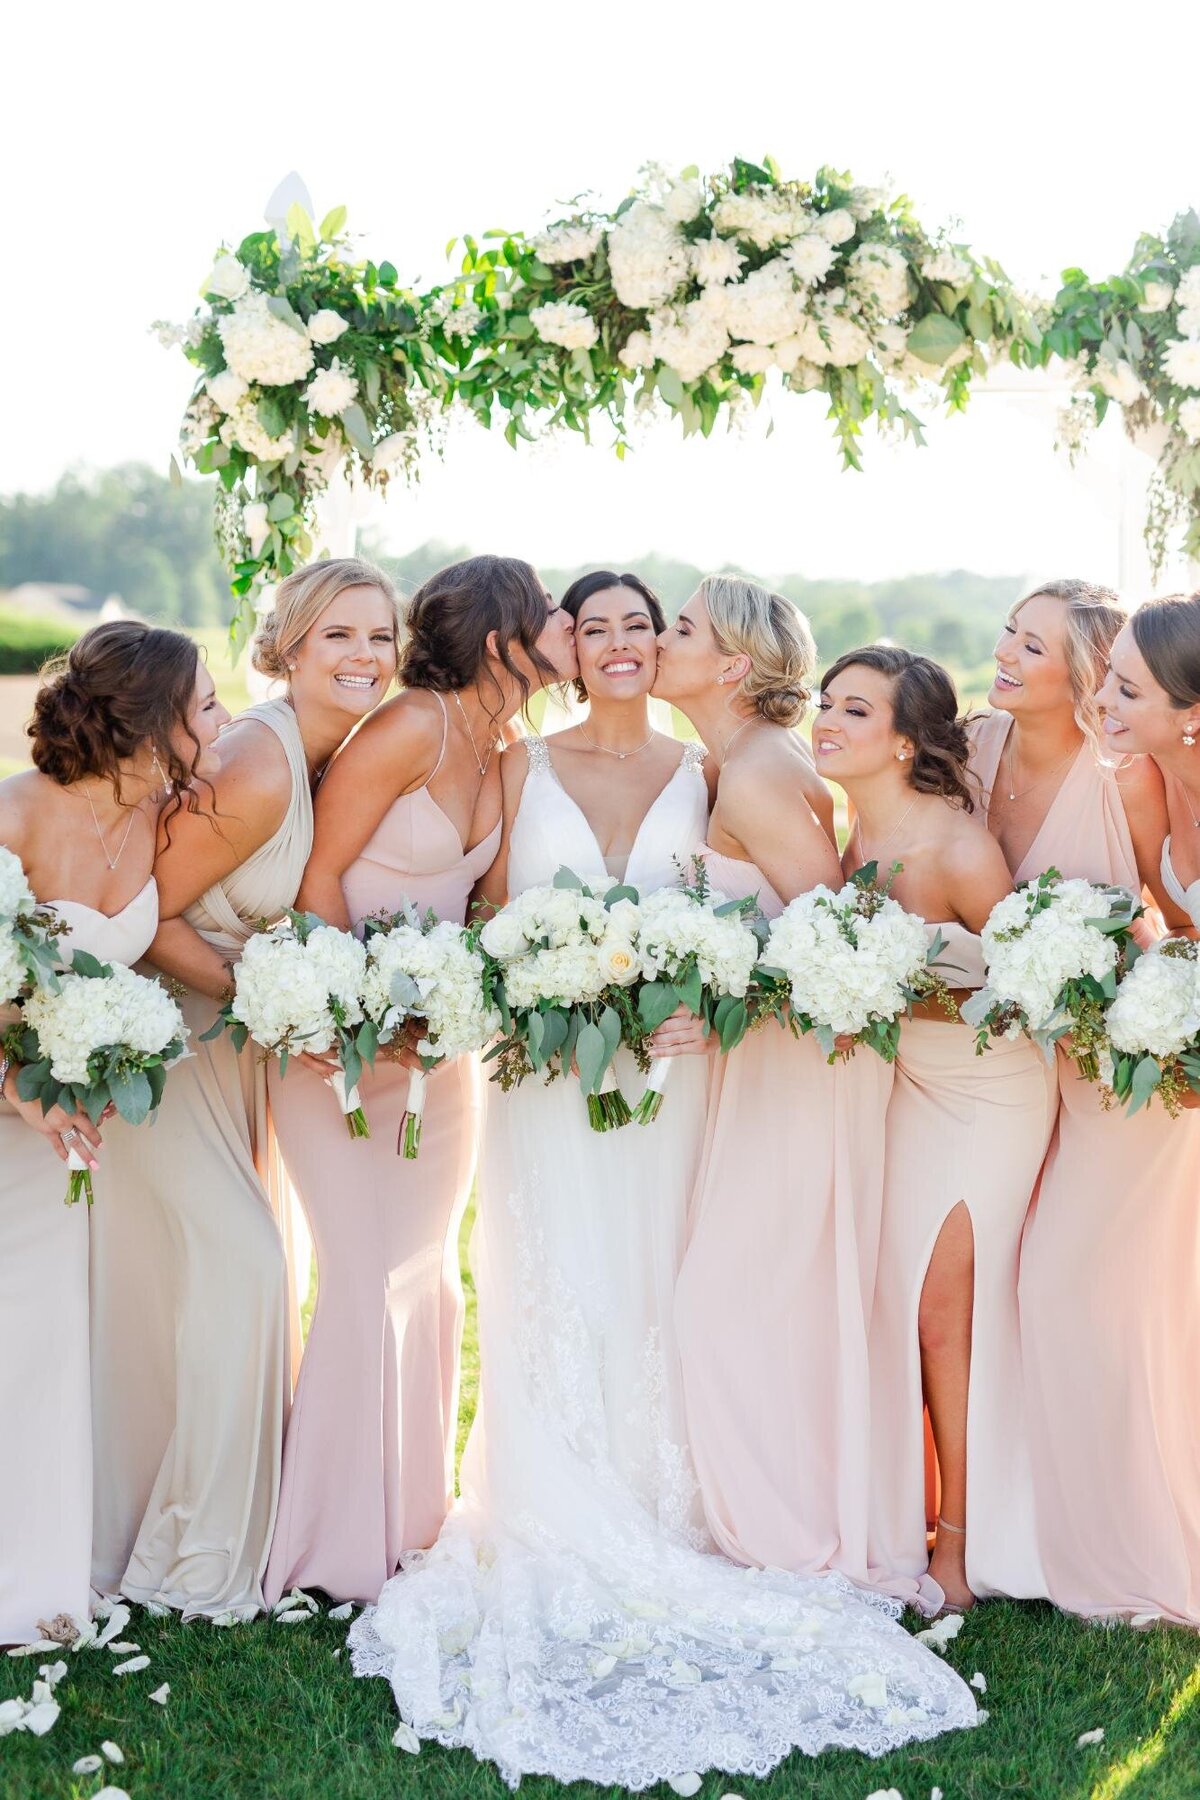 A bride smiling with her bridesmaids under a floral arch, all holding bouquets.